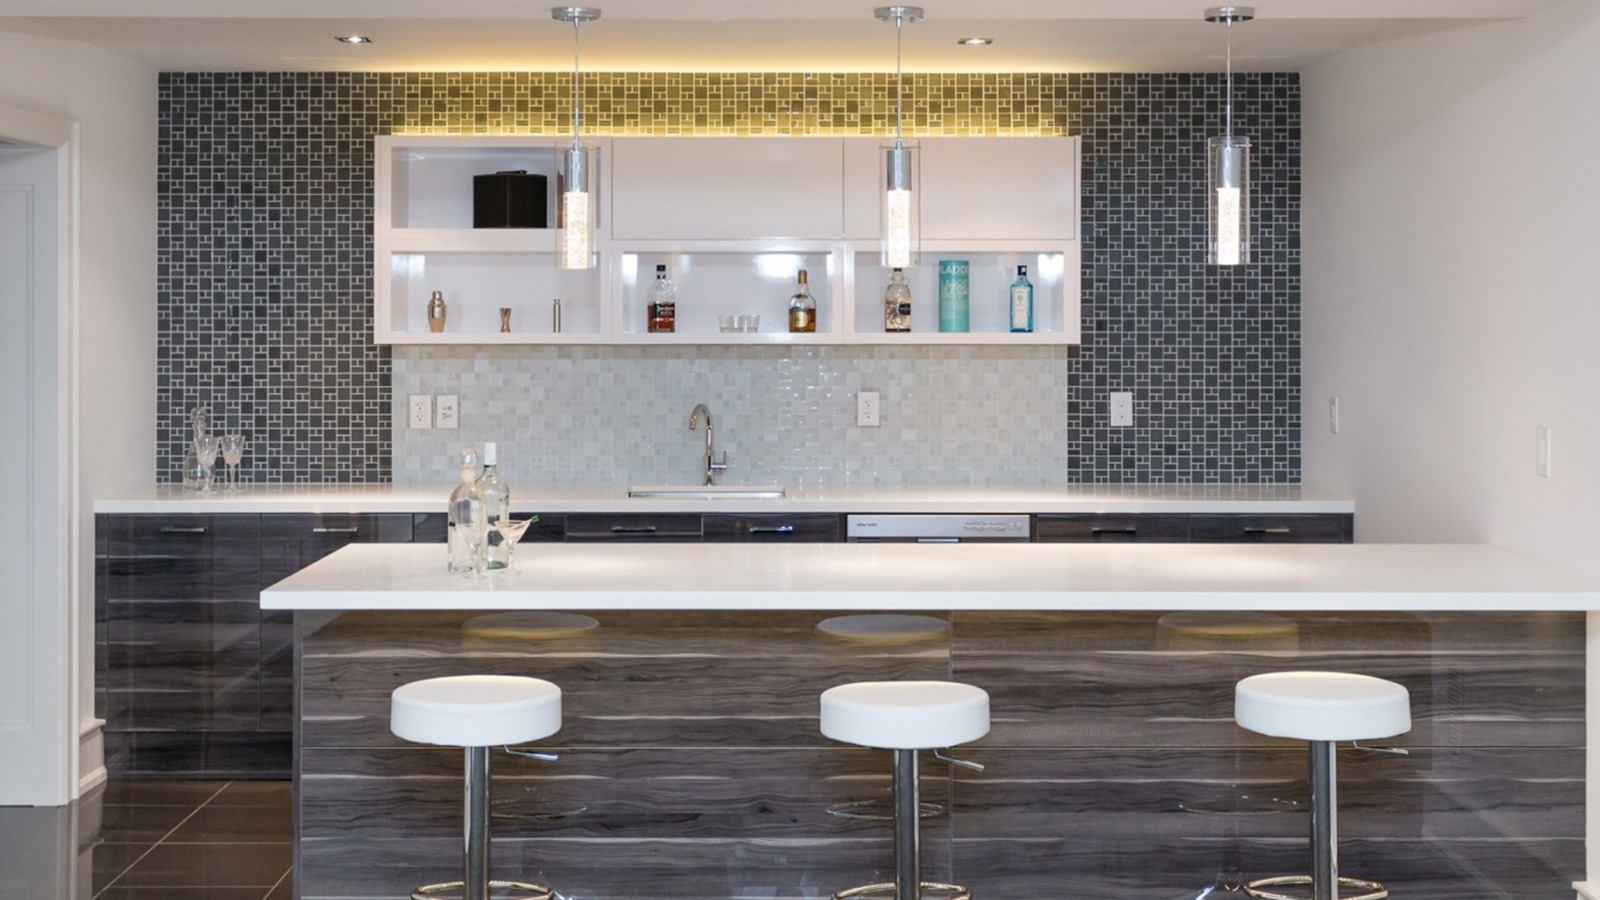 Home bar with white countertop, tile backsplash and white barstools.